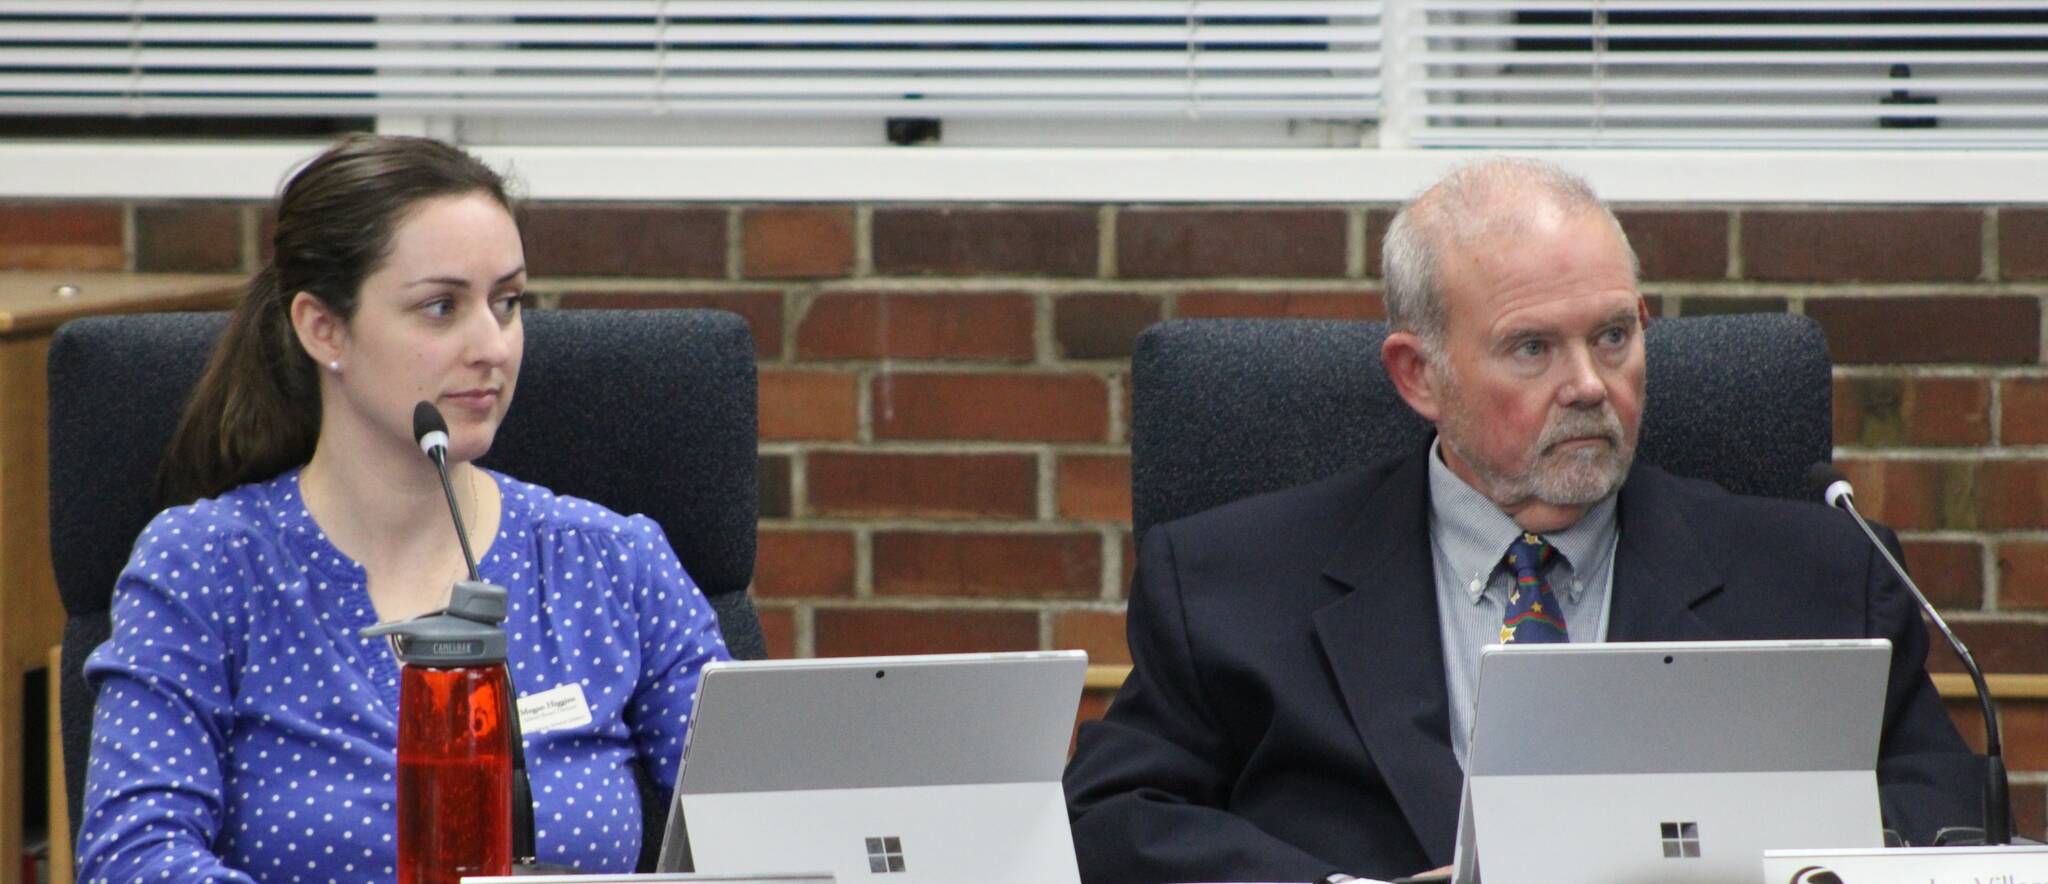 SKSD courtesy photo
Megan Higgins (left) and Jay Villars (right) sit next to one another minutes after being sworn into the South Kitsap School District Board of Directors.